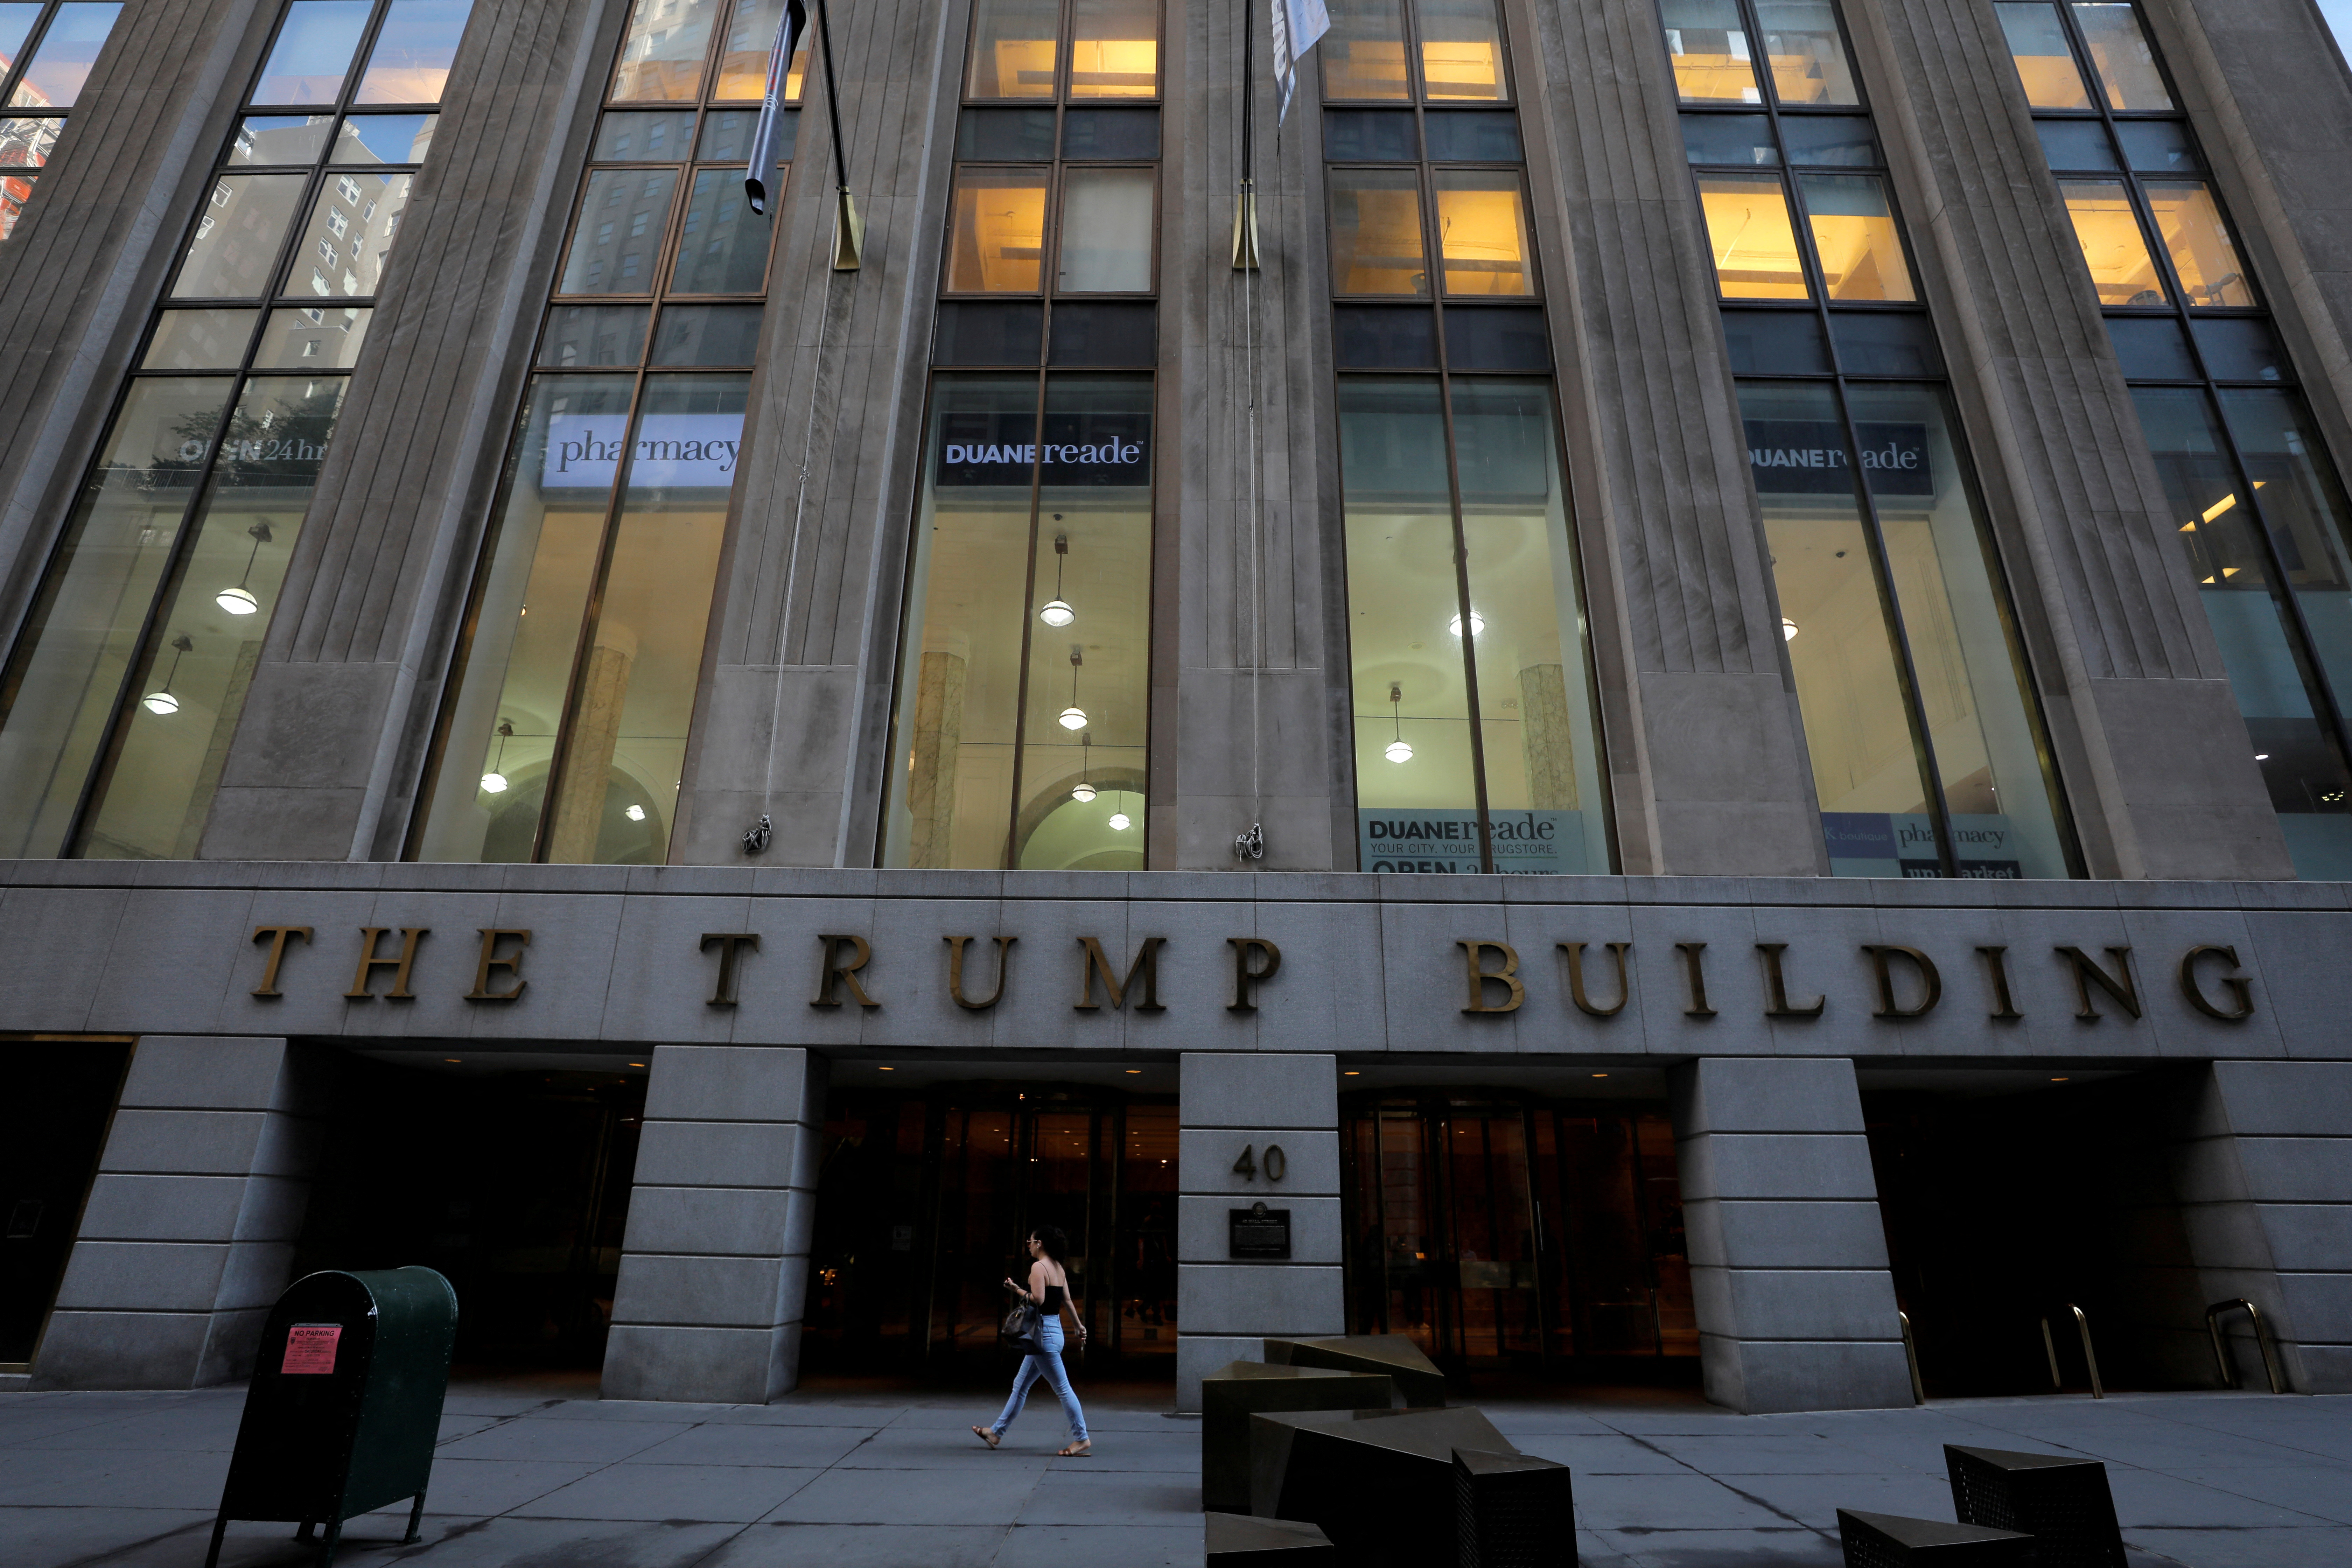 Signage is seen outside of the Trump Building in New York City